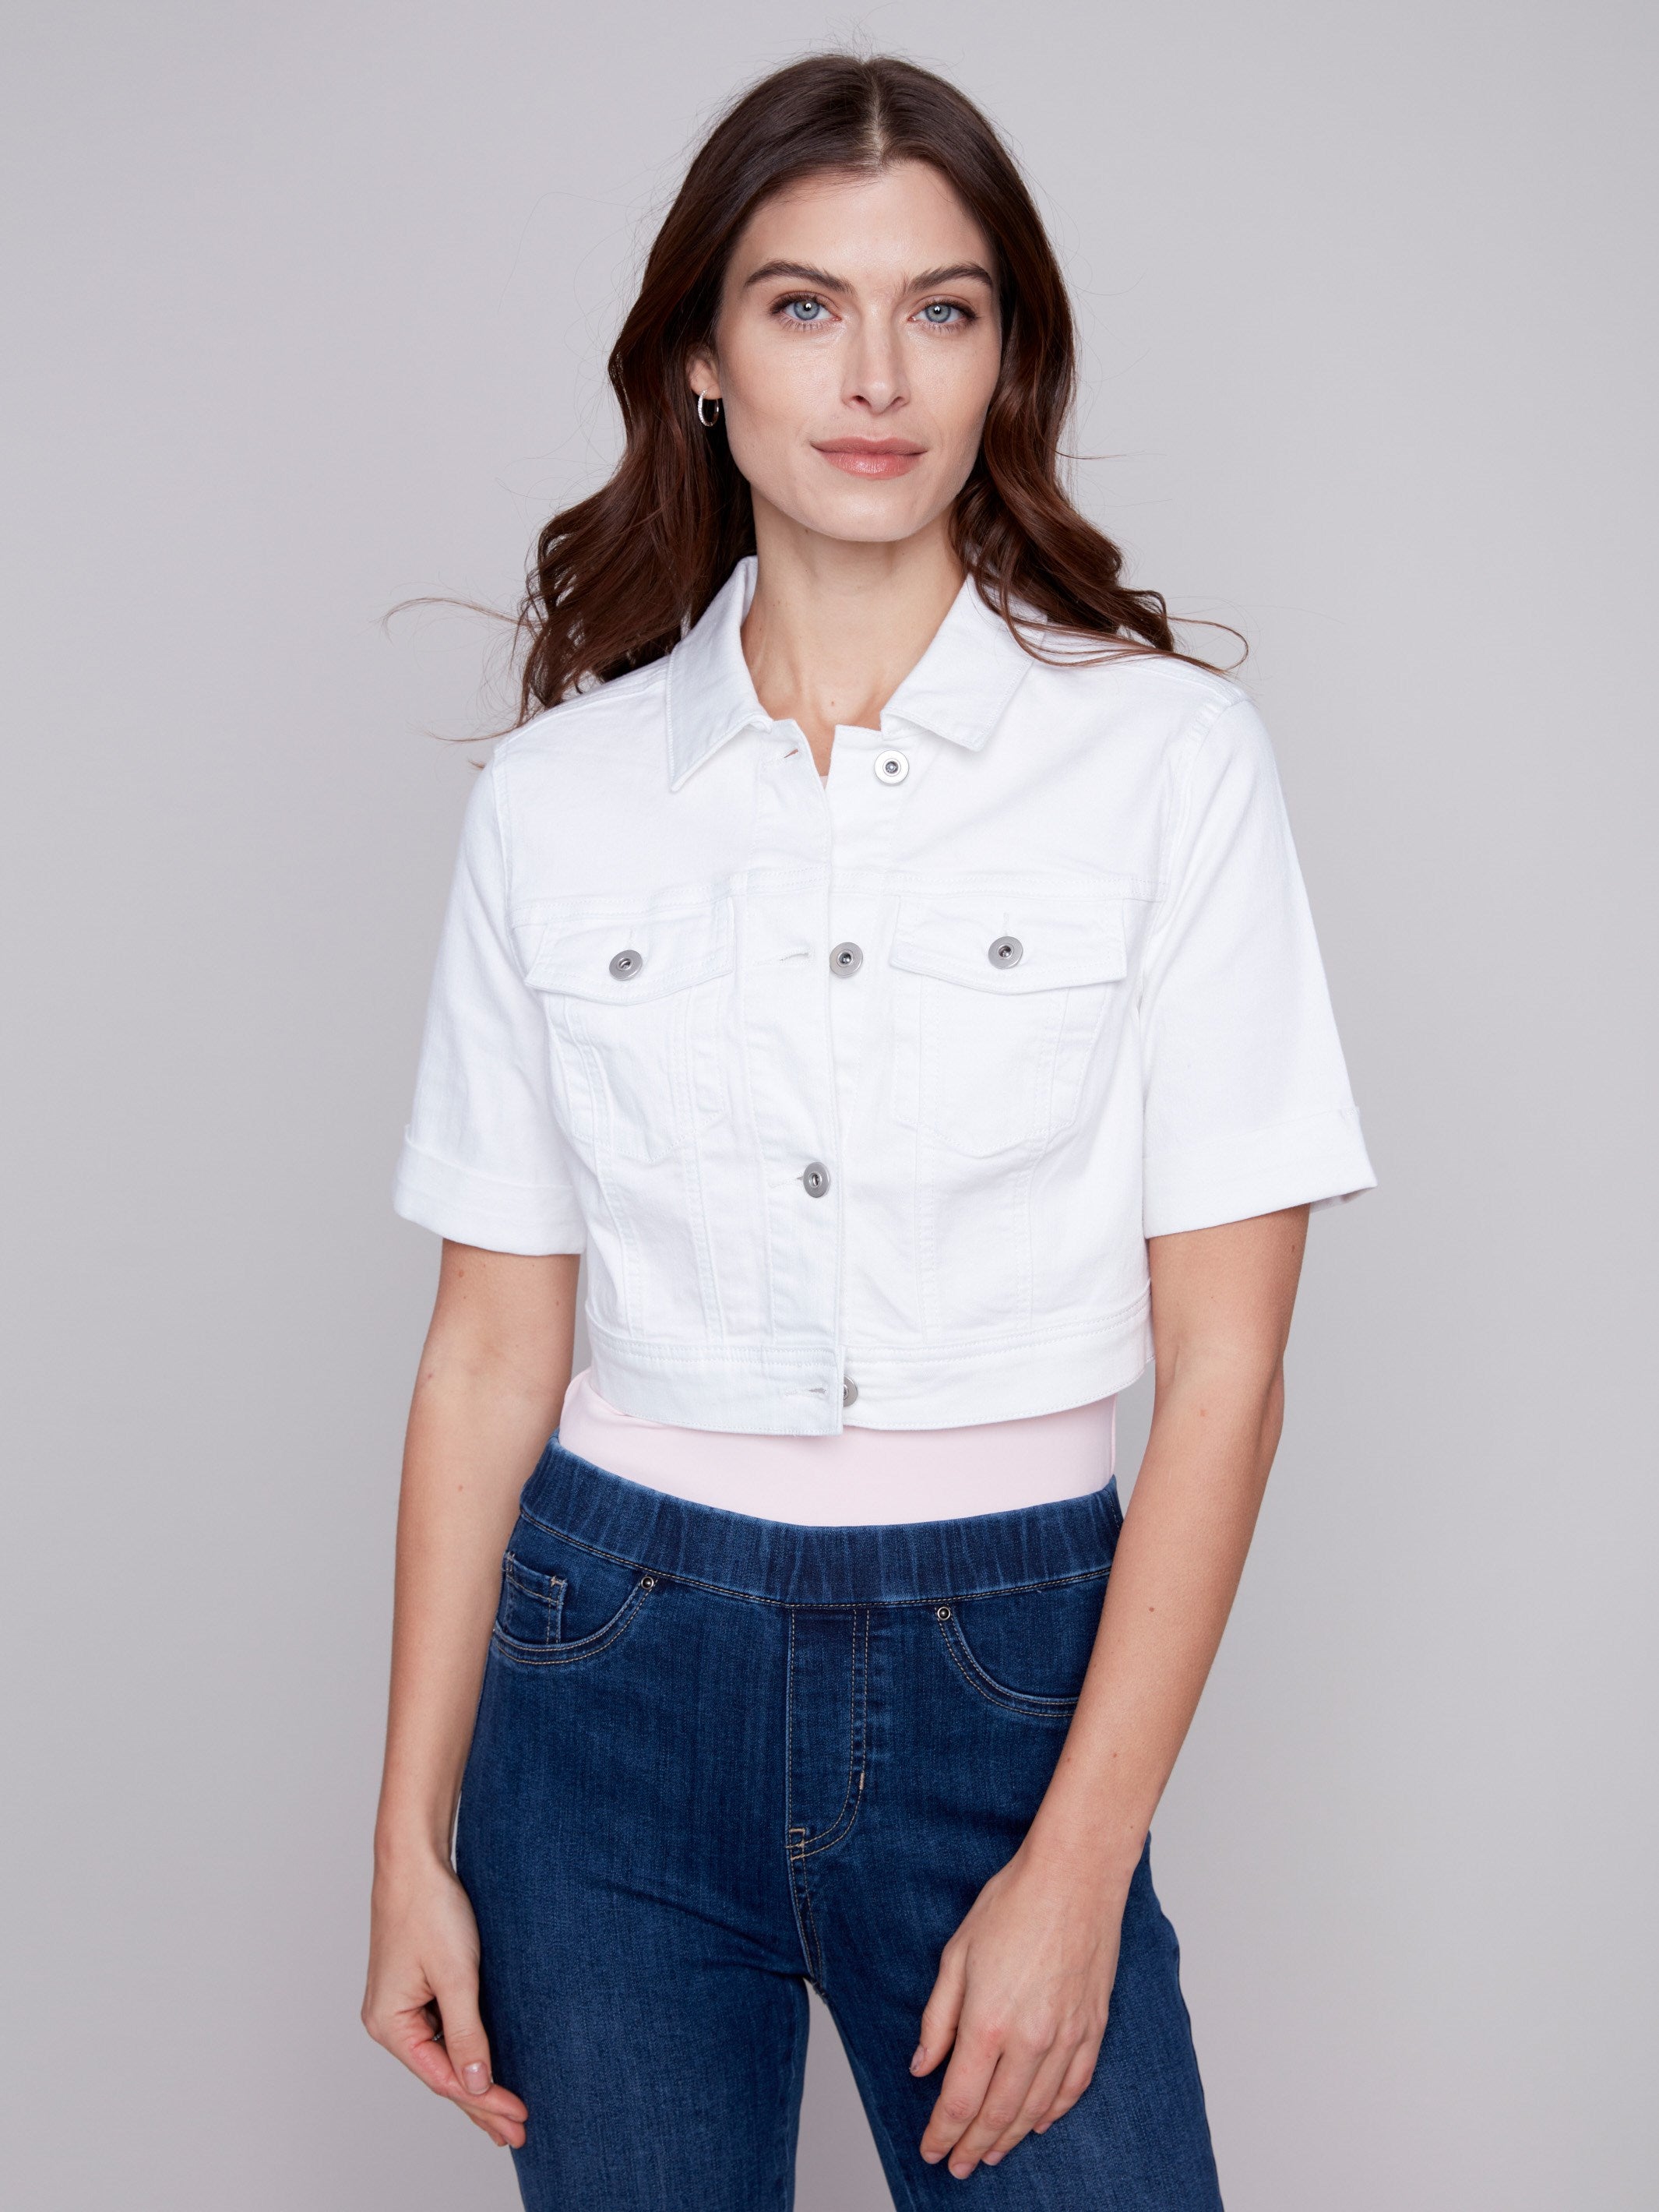 Charlie B Cropped Twill Jean Jacket - White - Image 4